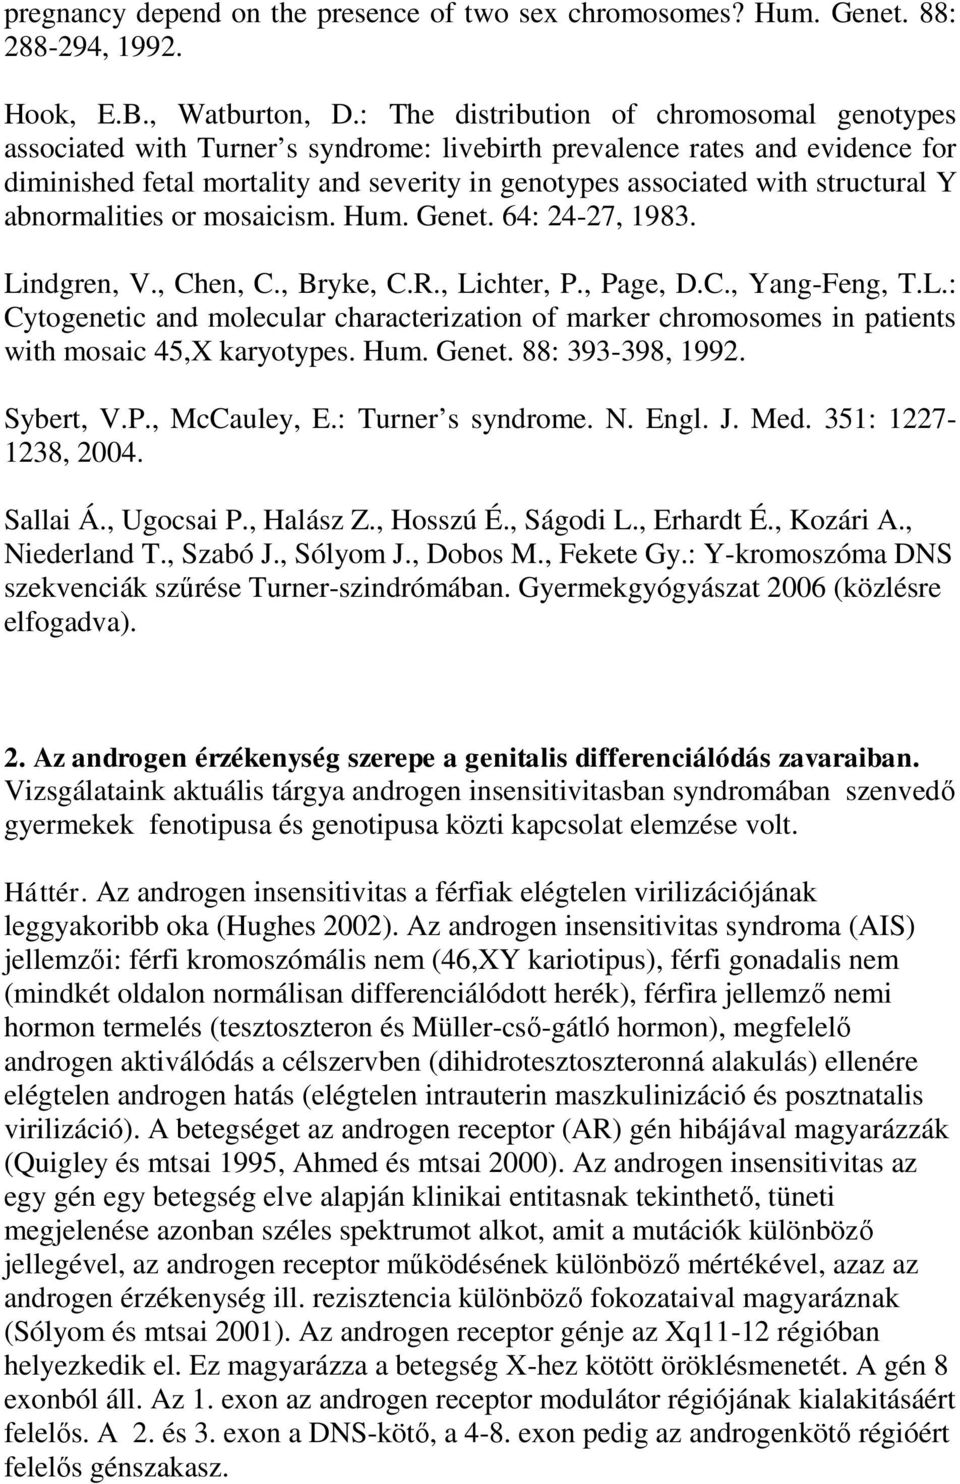 structural Y abnormalities or mosaicism. Hum. Genet. 64: 24-27, 1983. Lindgren, V., Chen, C., Bryke, C.R., Lichter, P., Page, D.C., Yang-Feng, T.L.: Cytogenetic and molecular characterization of marker chromosomes in patients with mosaic 45,X karyotypes.